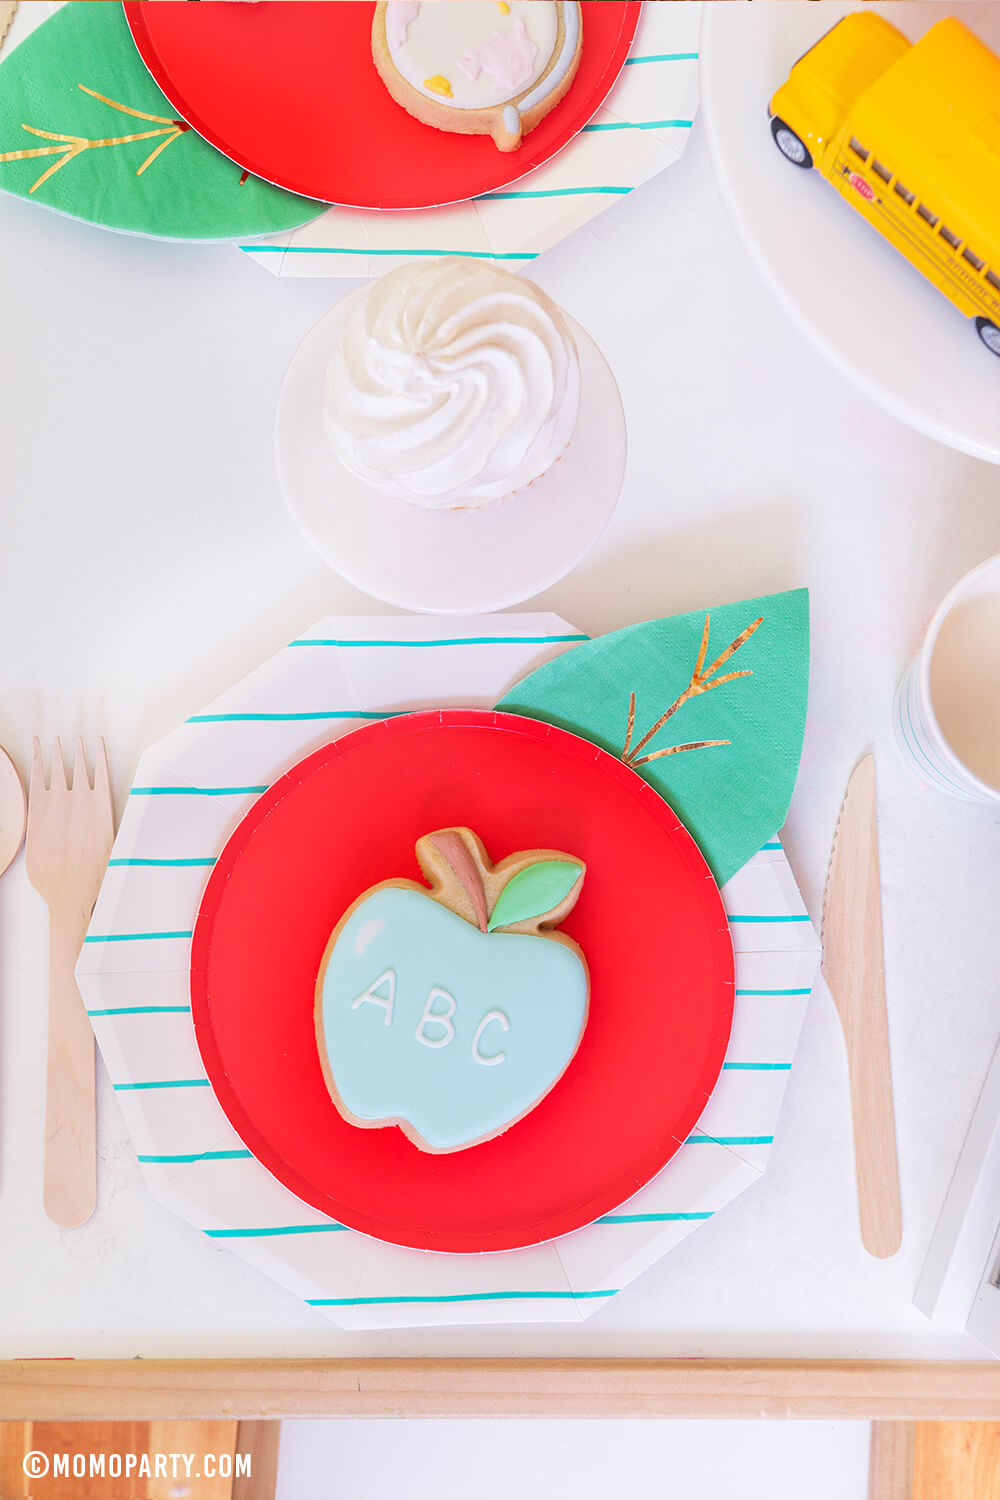 a Top view kid's table with a pastel ABC Apple cookie on top of Oh happy day Cherry Red side plate with Meri Meri Leaf napkin represent as Apple. Day Dream Society Aqua Striped Large Plates, wooden cutlery, cupcakes, school bus toys for a modern Back to school party celebration. 2020 Quarantine back to school home Party 